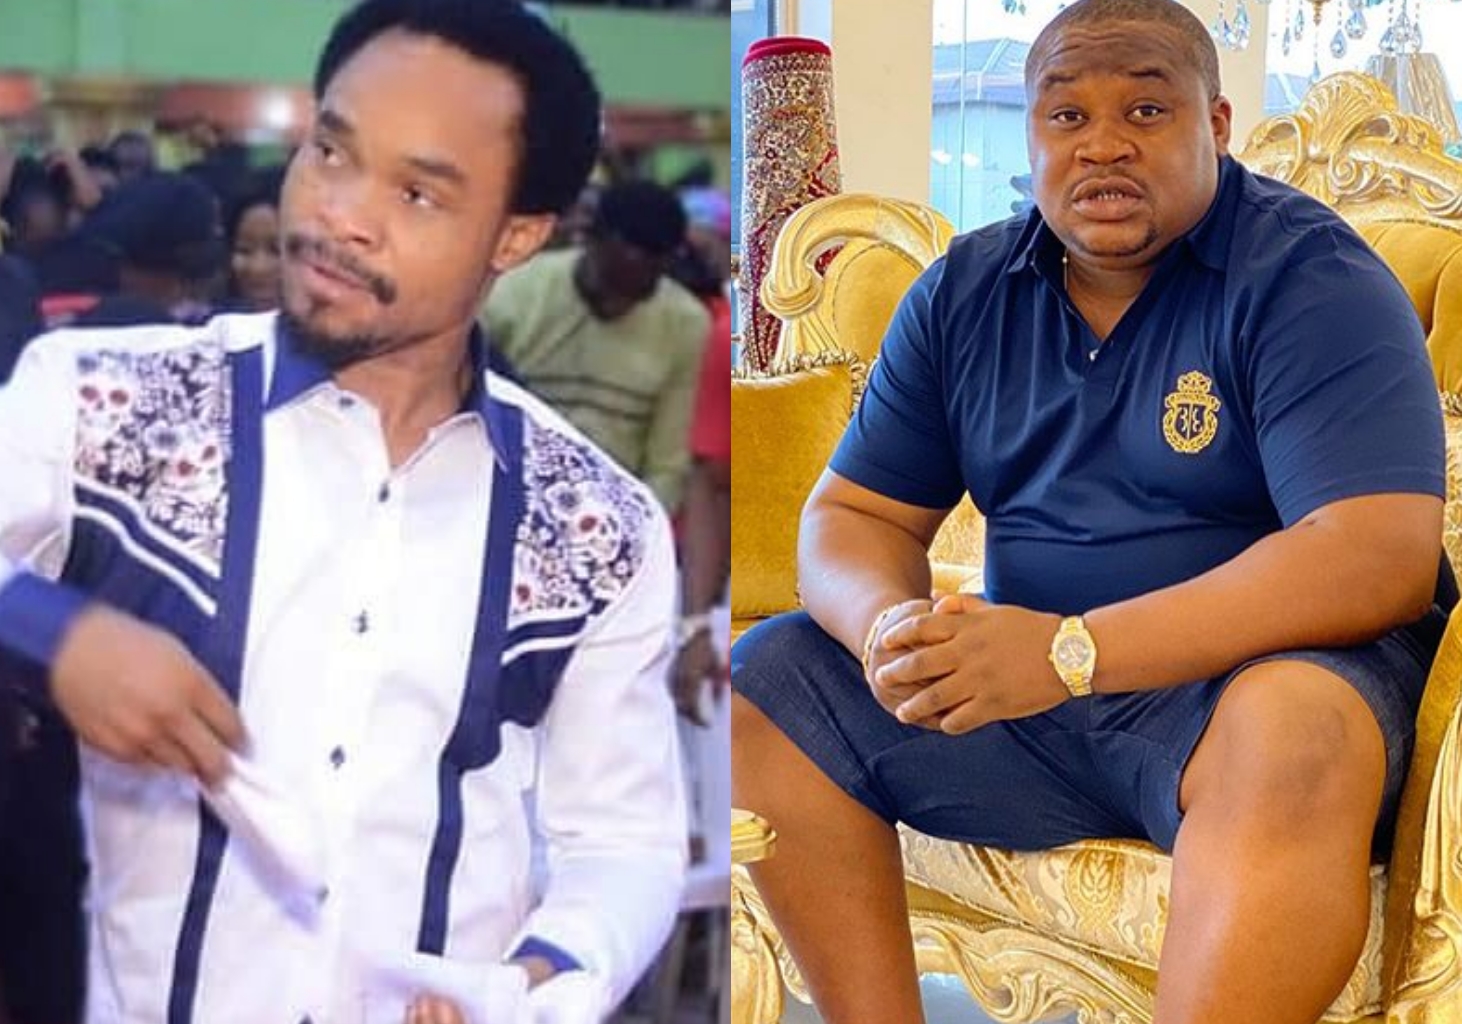 "You're my brother" – Cubana Chief Priest endorses Pastor Odumeje Dlion alias Indaboski (Video)